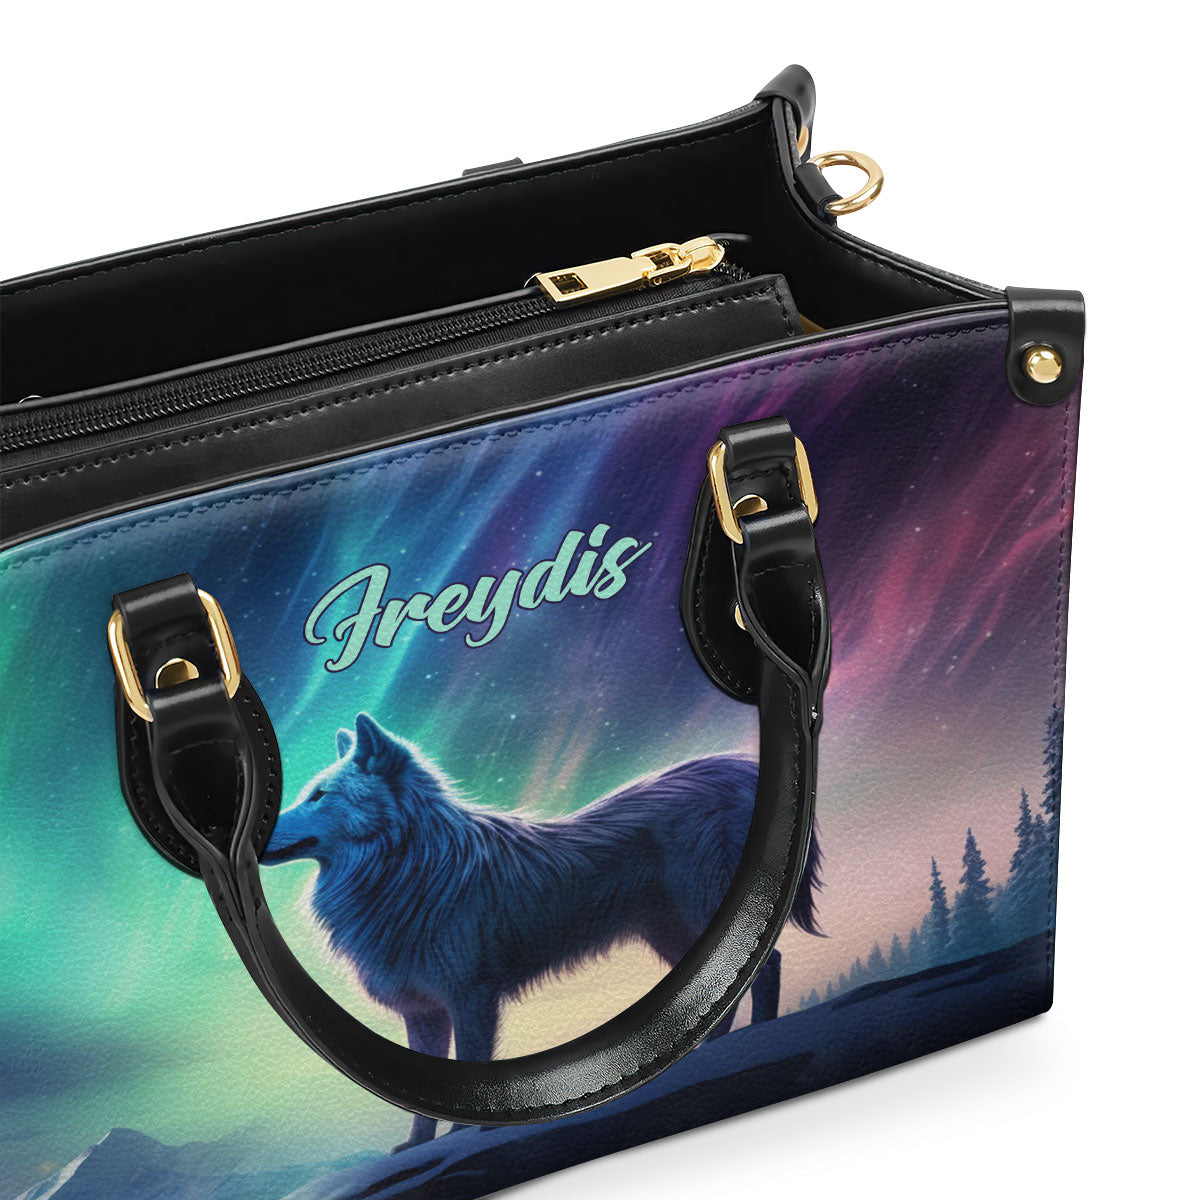 Wolf - Personalized Leather Handbag MS-H64